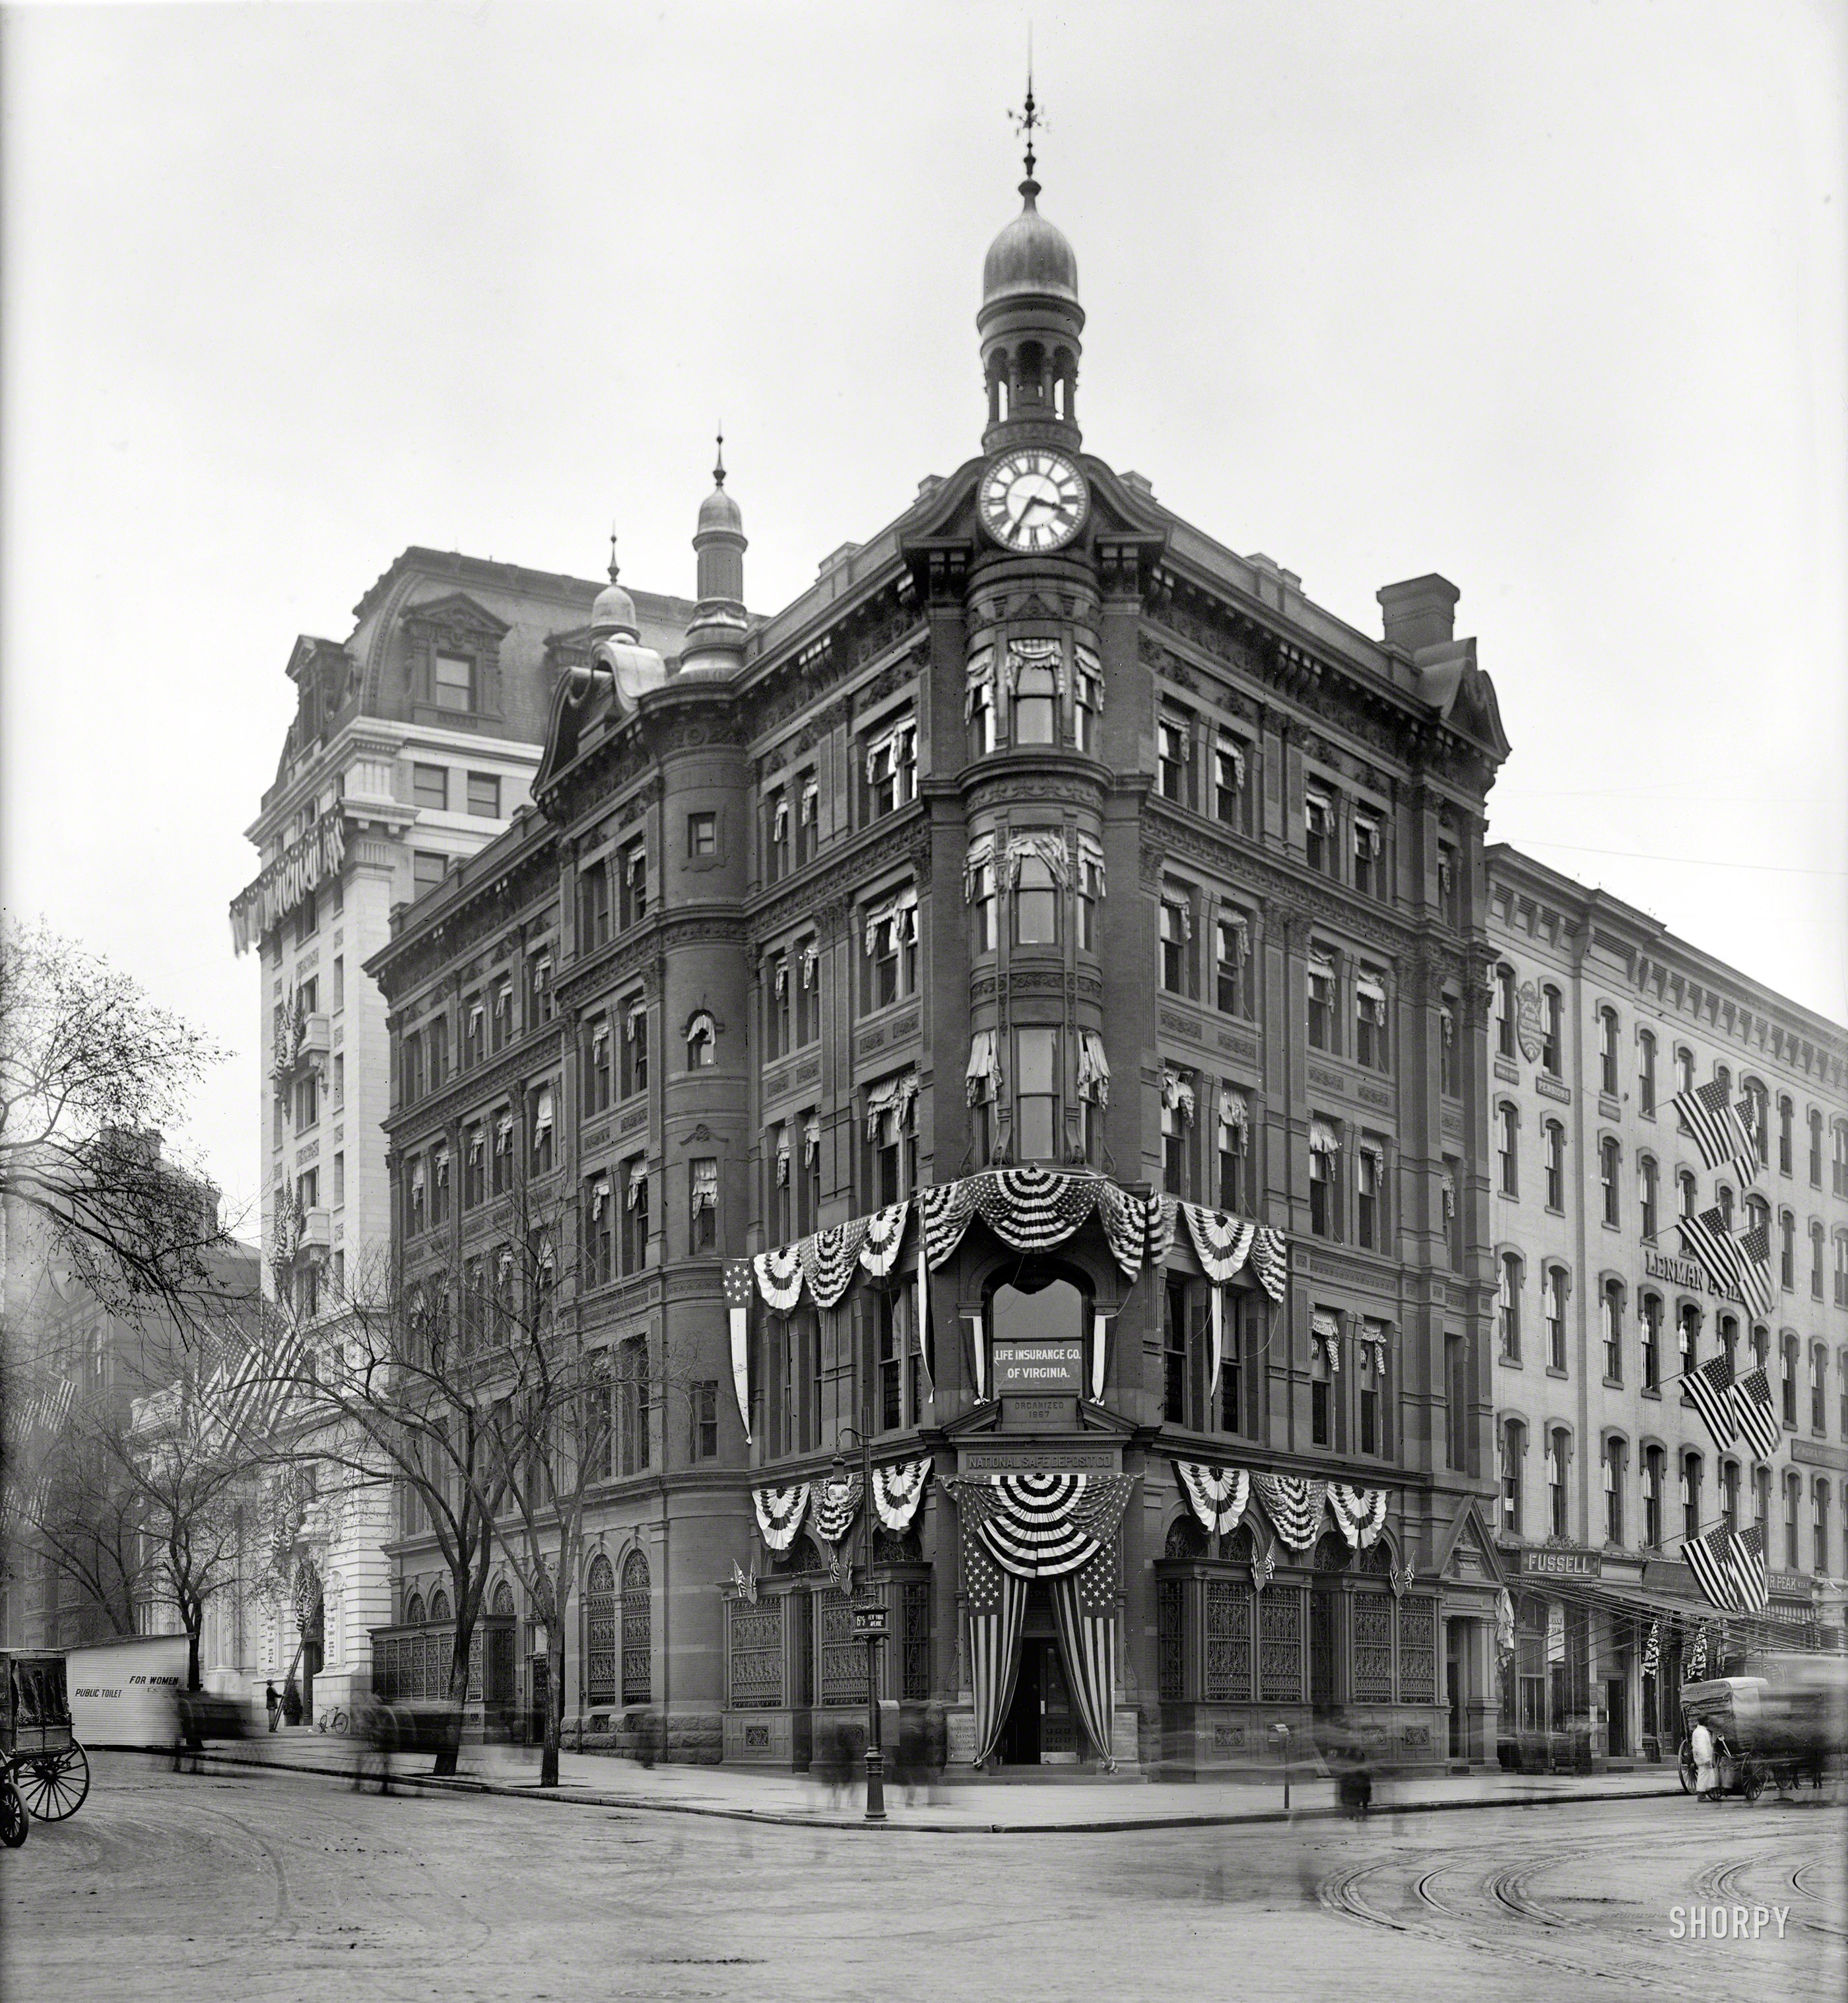 Washington, D.C., circa 1912. "National Safe Deposit Savings & Trust Co., 15th St. & New York Avenue." Note the PUBLIC TOILET FOR WOMEN, possibly for a parade. National Photo Company Collection glass negative. View full size.